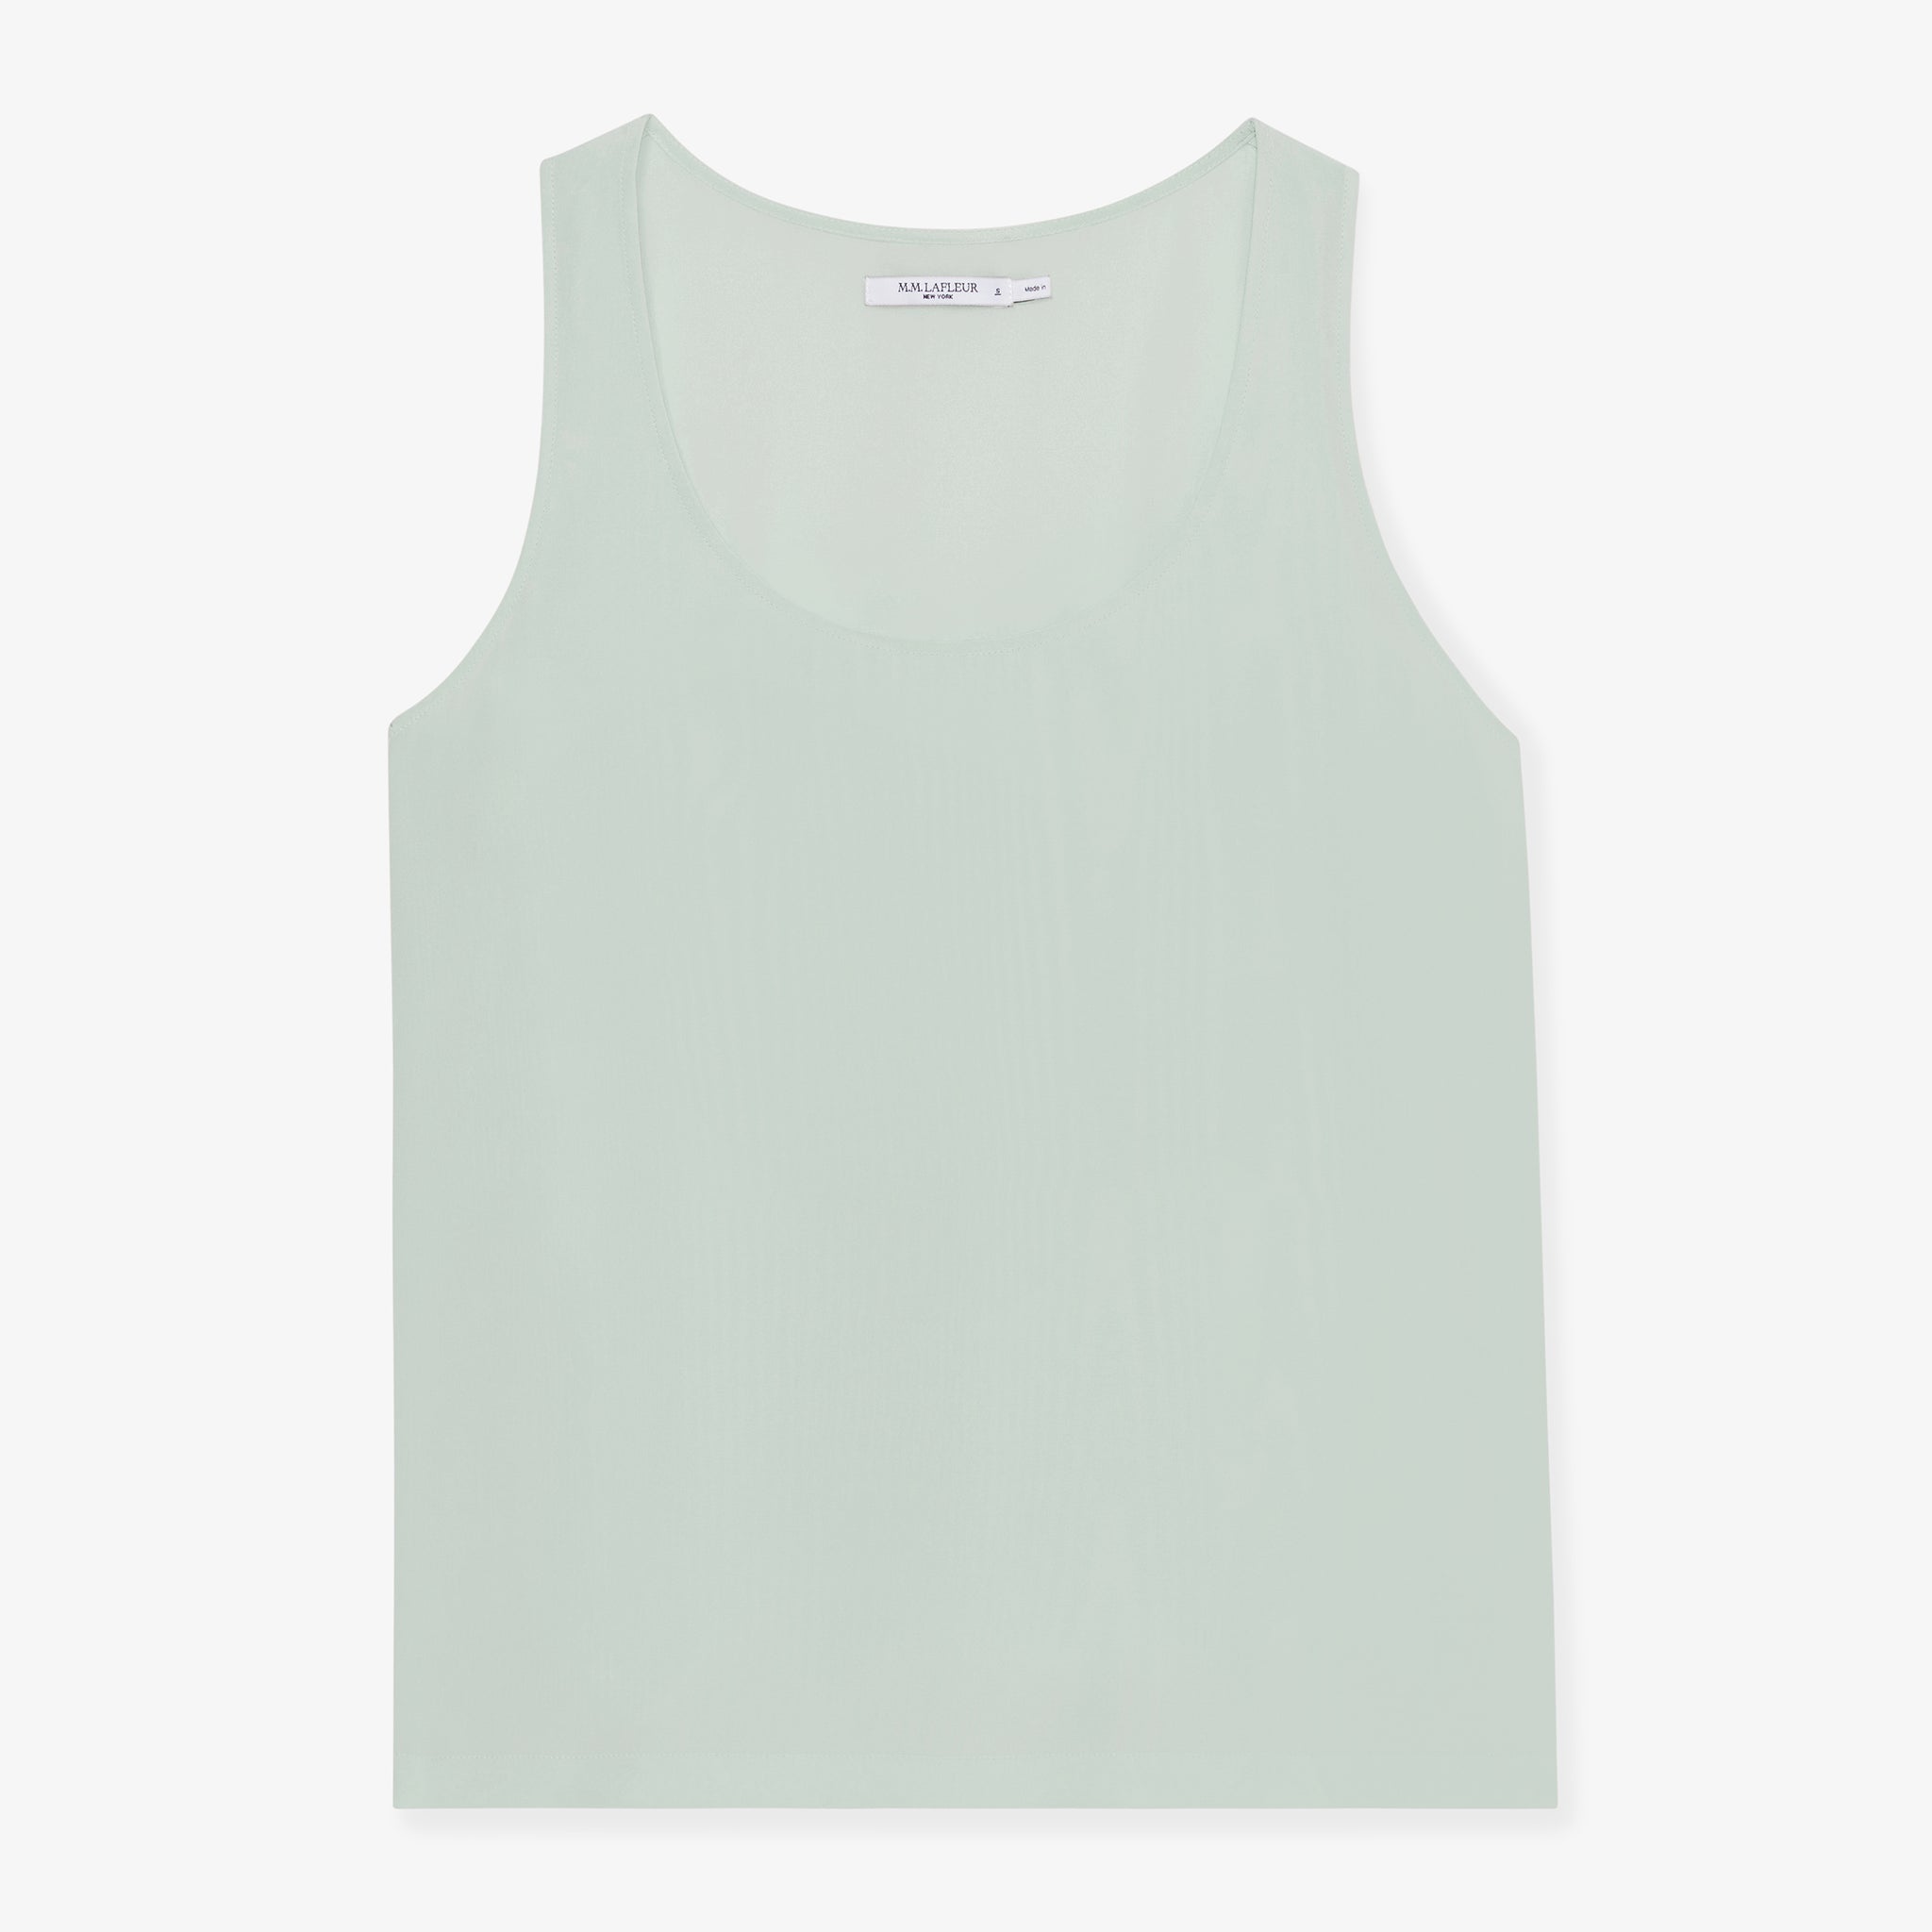 Packshot image of the Vicky tank in Minty Green